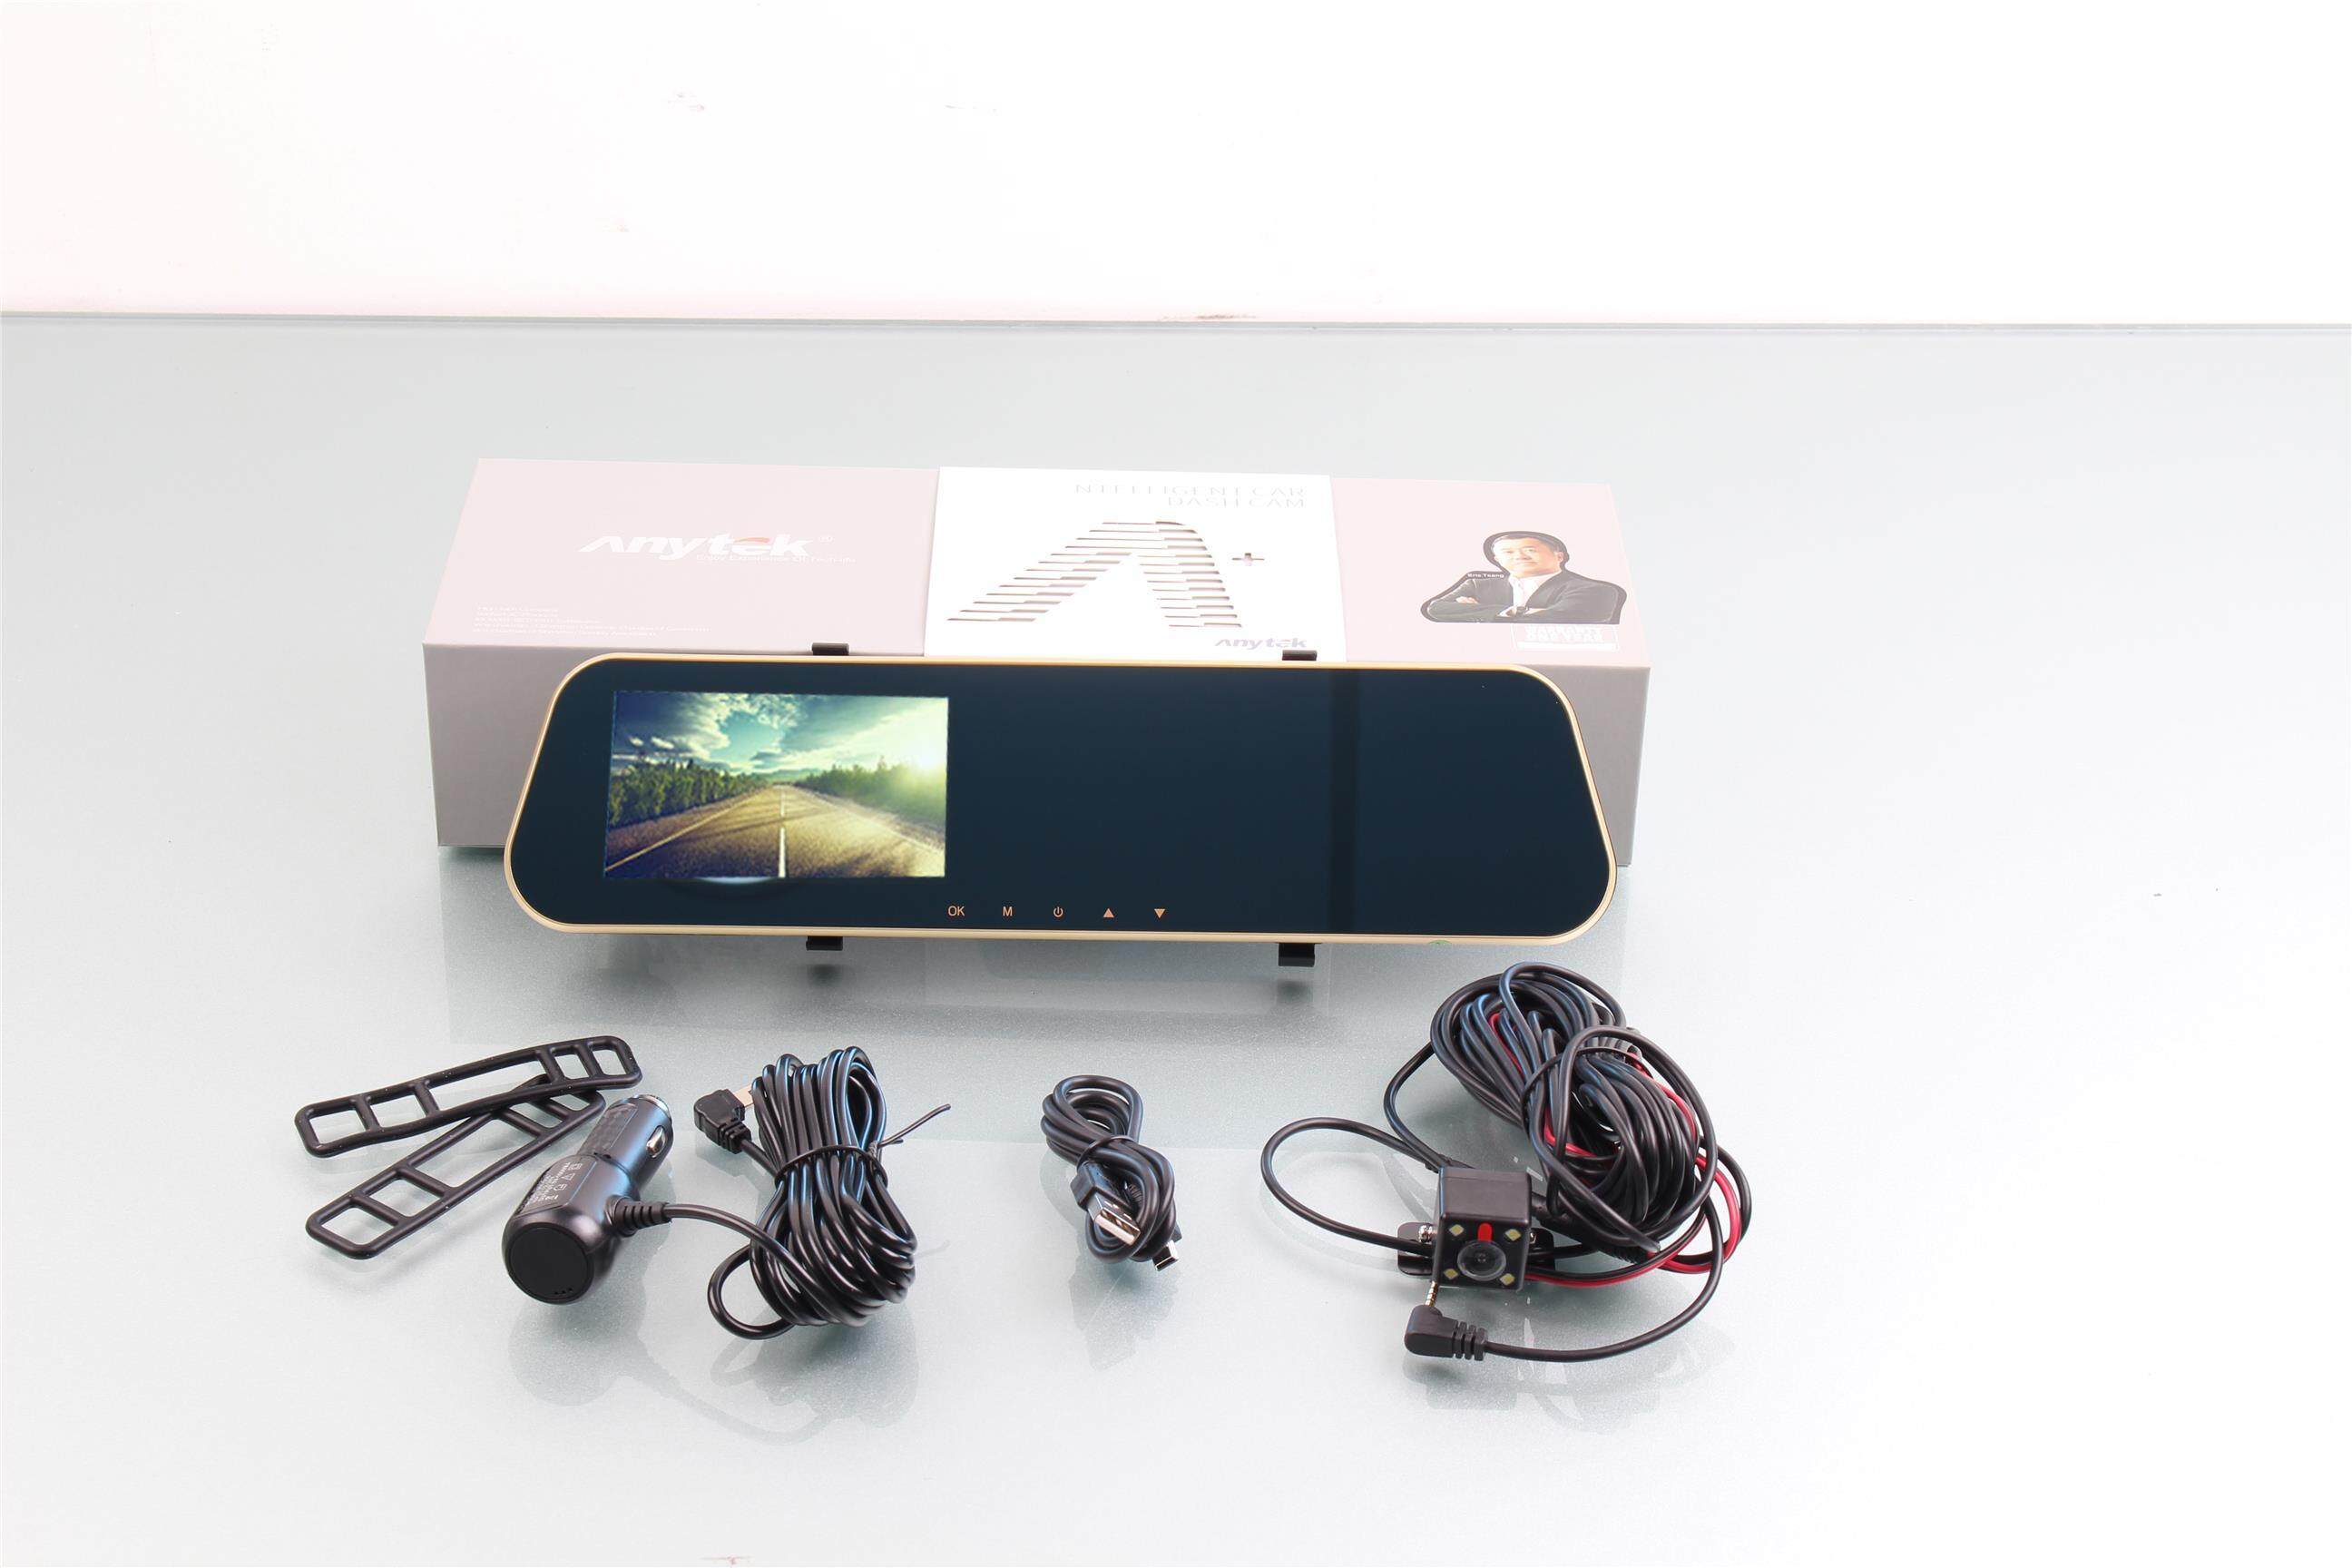 Anytek Q1 1080p 4.3 Screen LTPS Display Vehicle DVR Wide Angle Viewing With Reverse Camera (Free 16GB Micro SD)